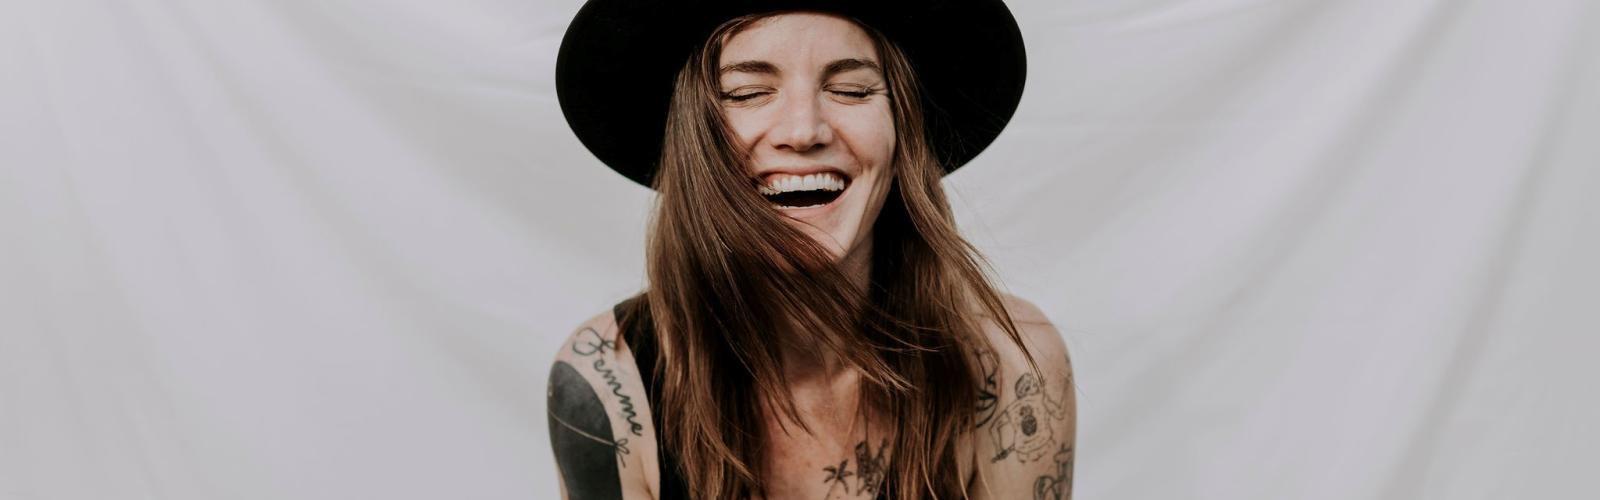 Image of Abbe May singer, smilling wearing a black hat and tank top with tattoos on her arms